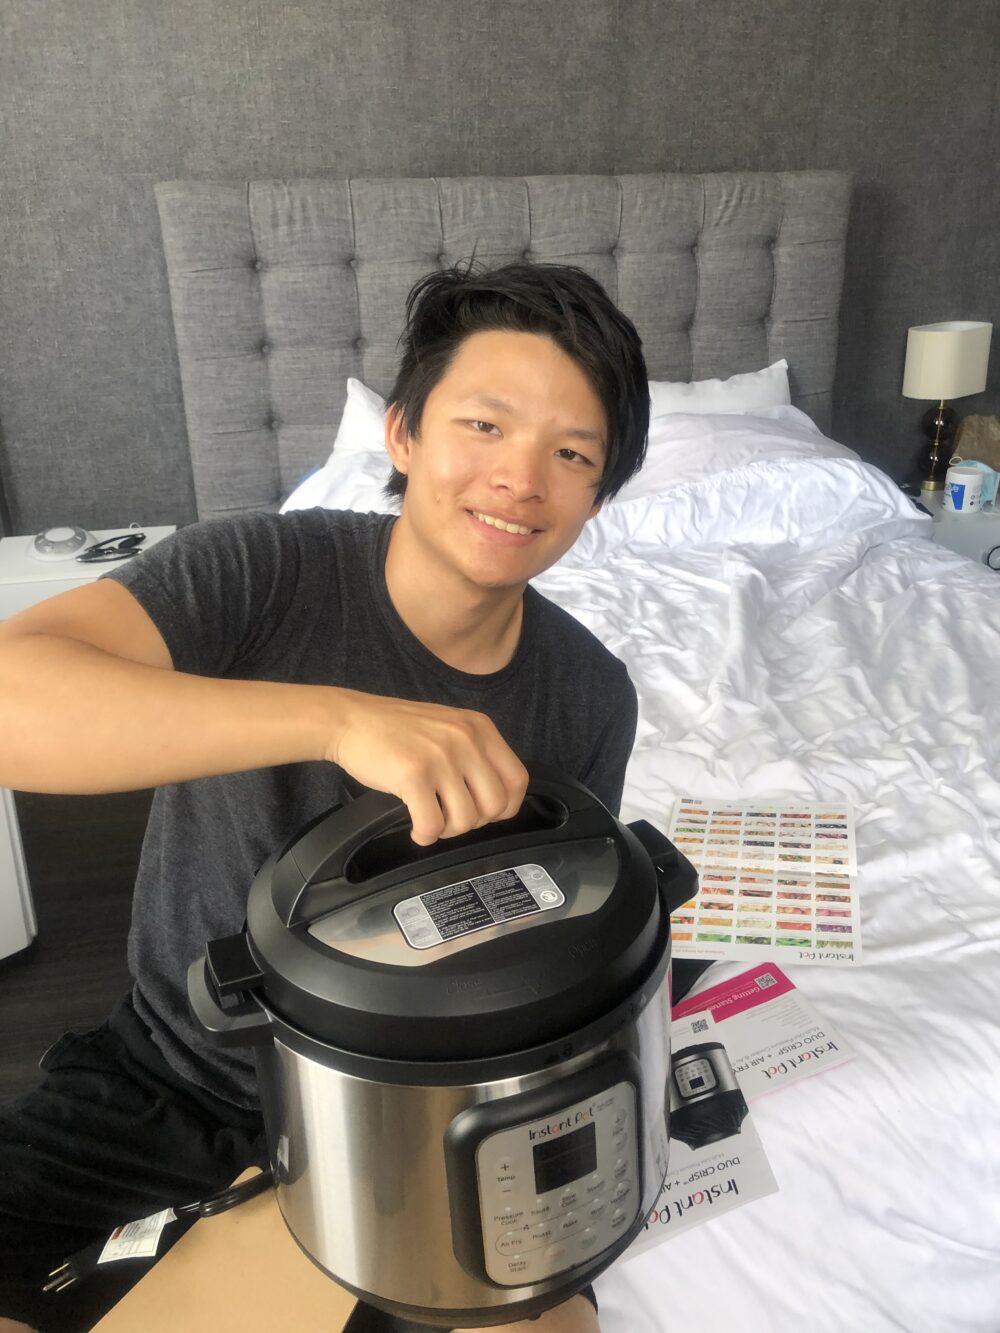 raymond holding a pressure cooker